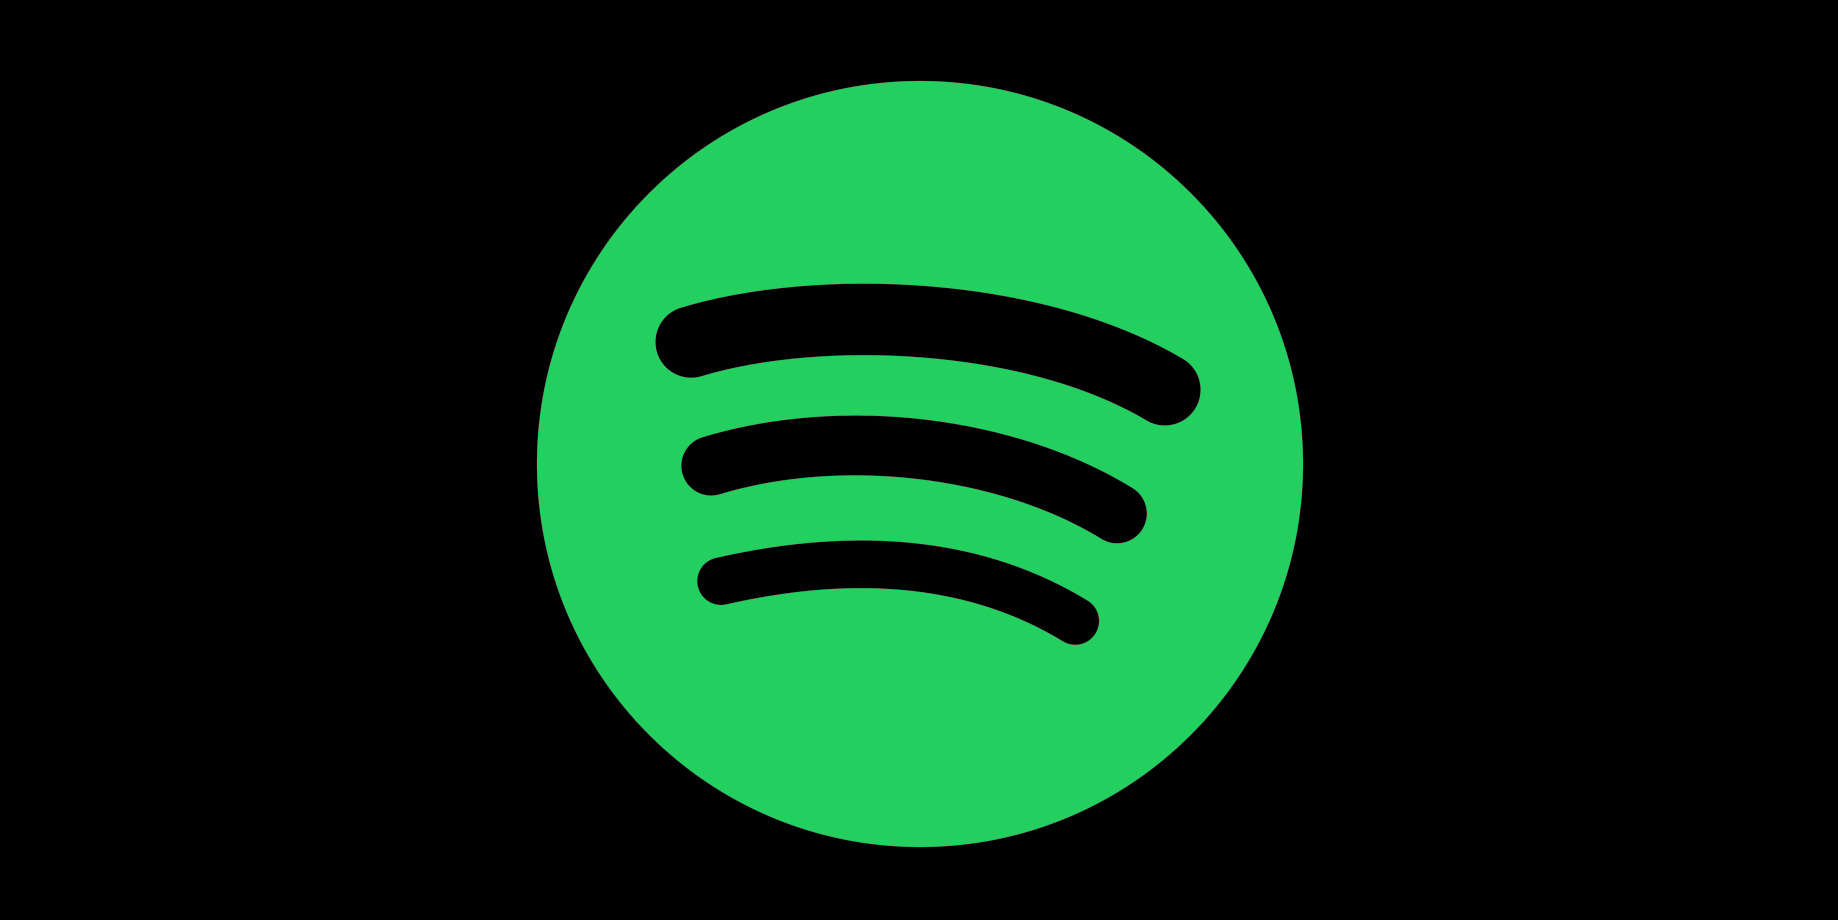 download the last version for windows Spotify 1.2.14.1141